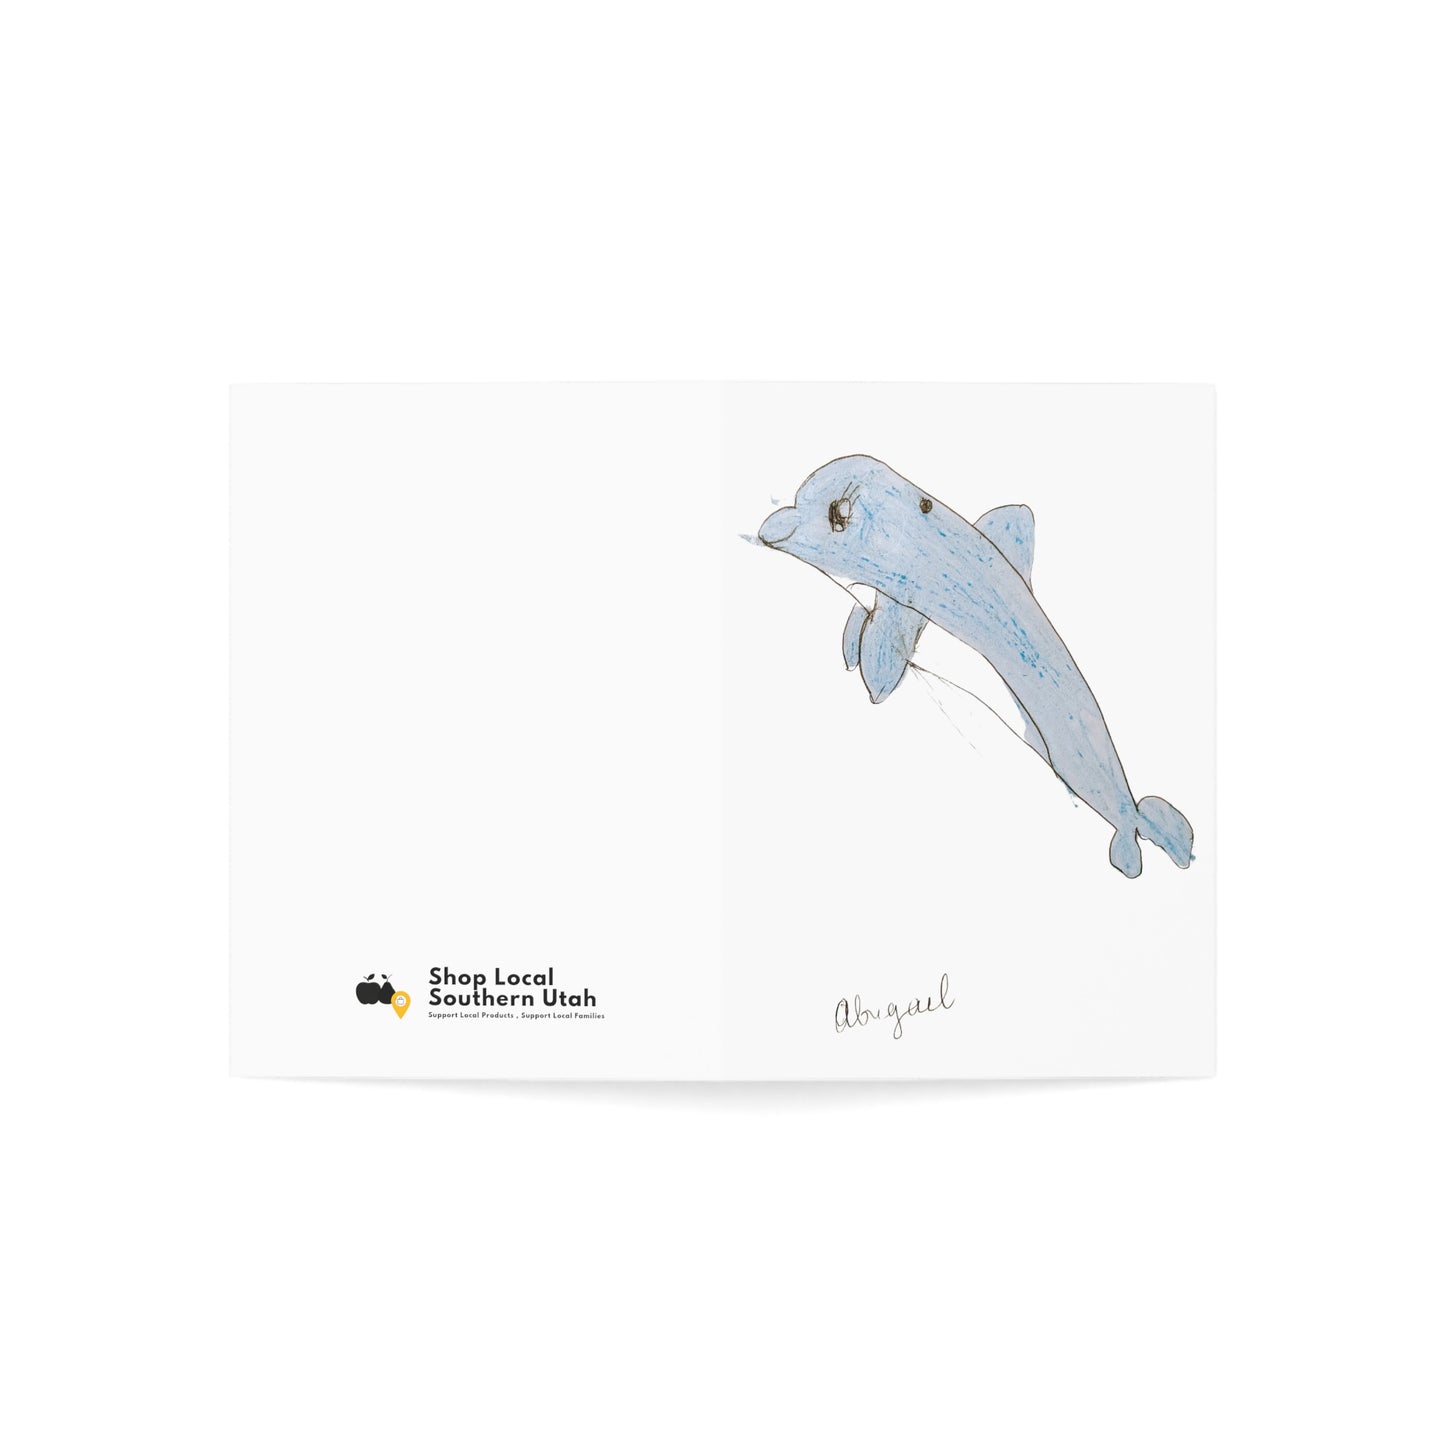 Abigail's Artistry: Dolphin Dreams Greeting Cards - Support a Young Artist's Dance Ambition"